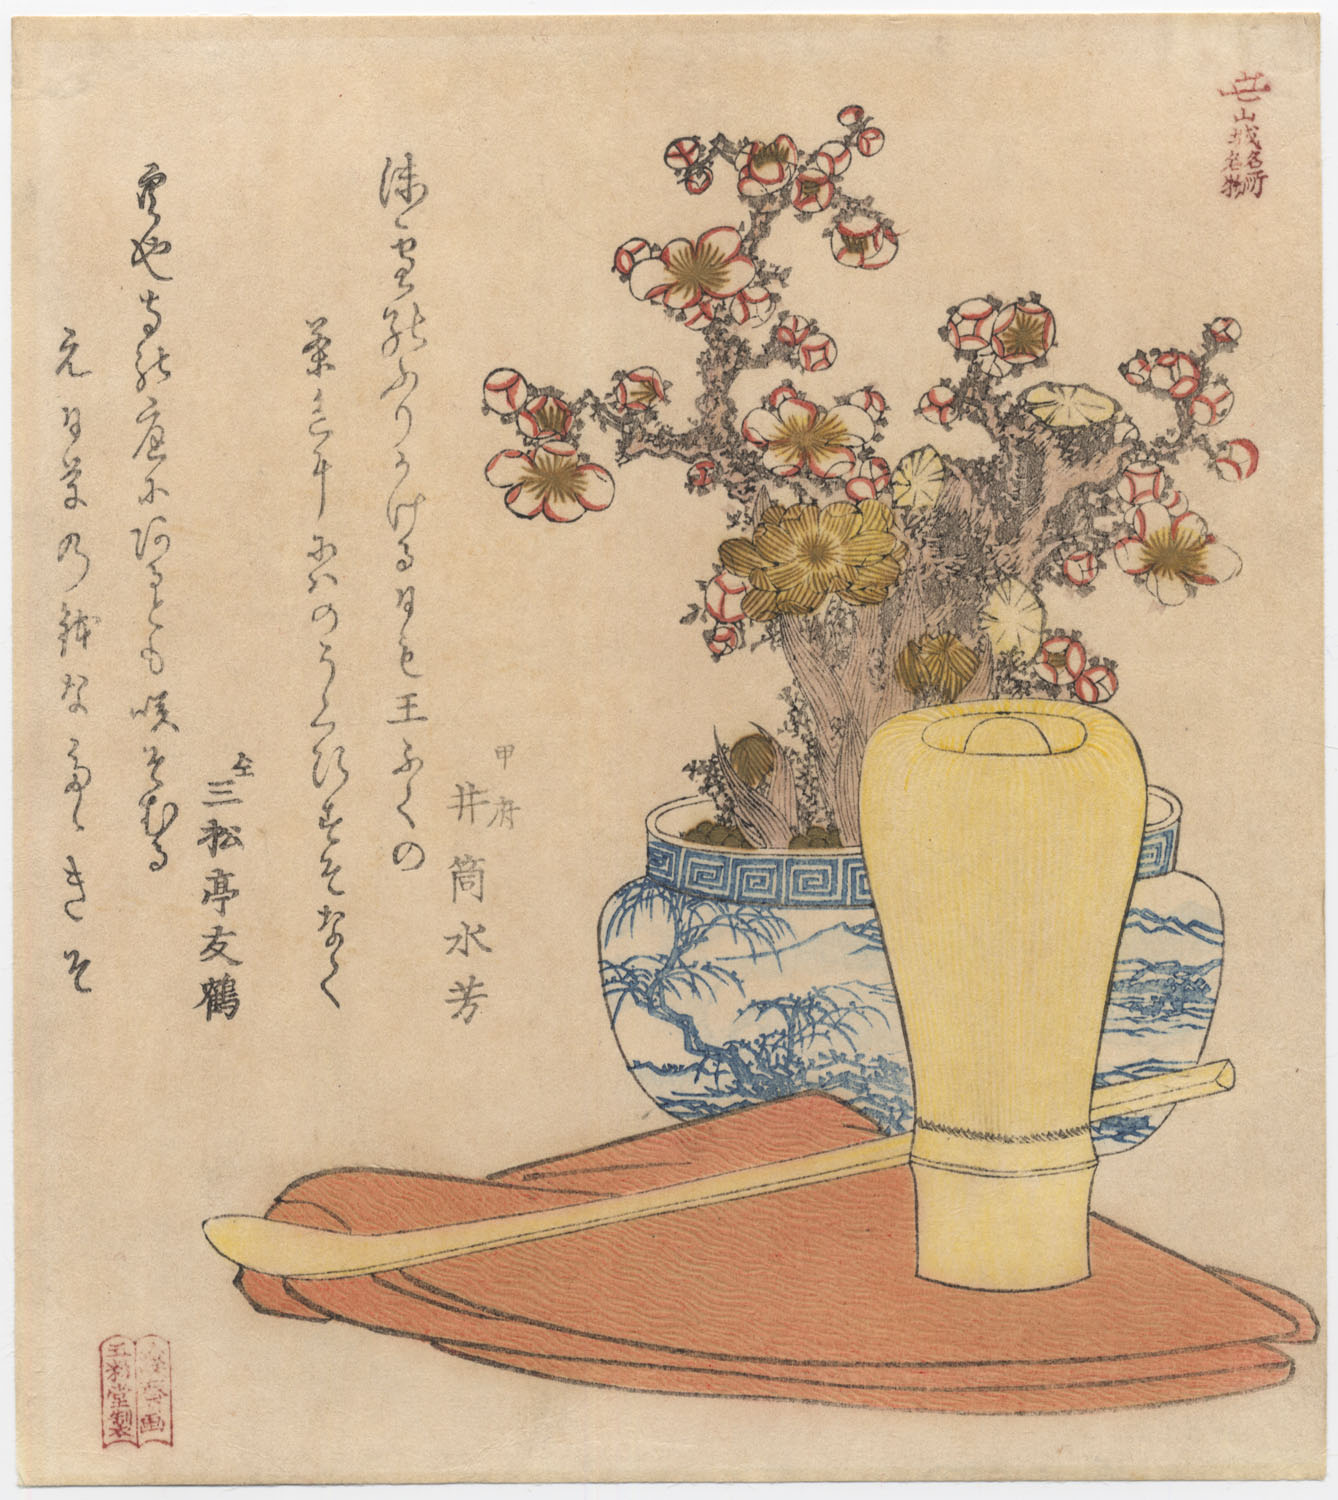 EISEN (1790-1848) Tea ceremony objects. (Sold)